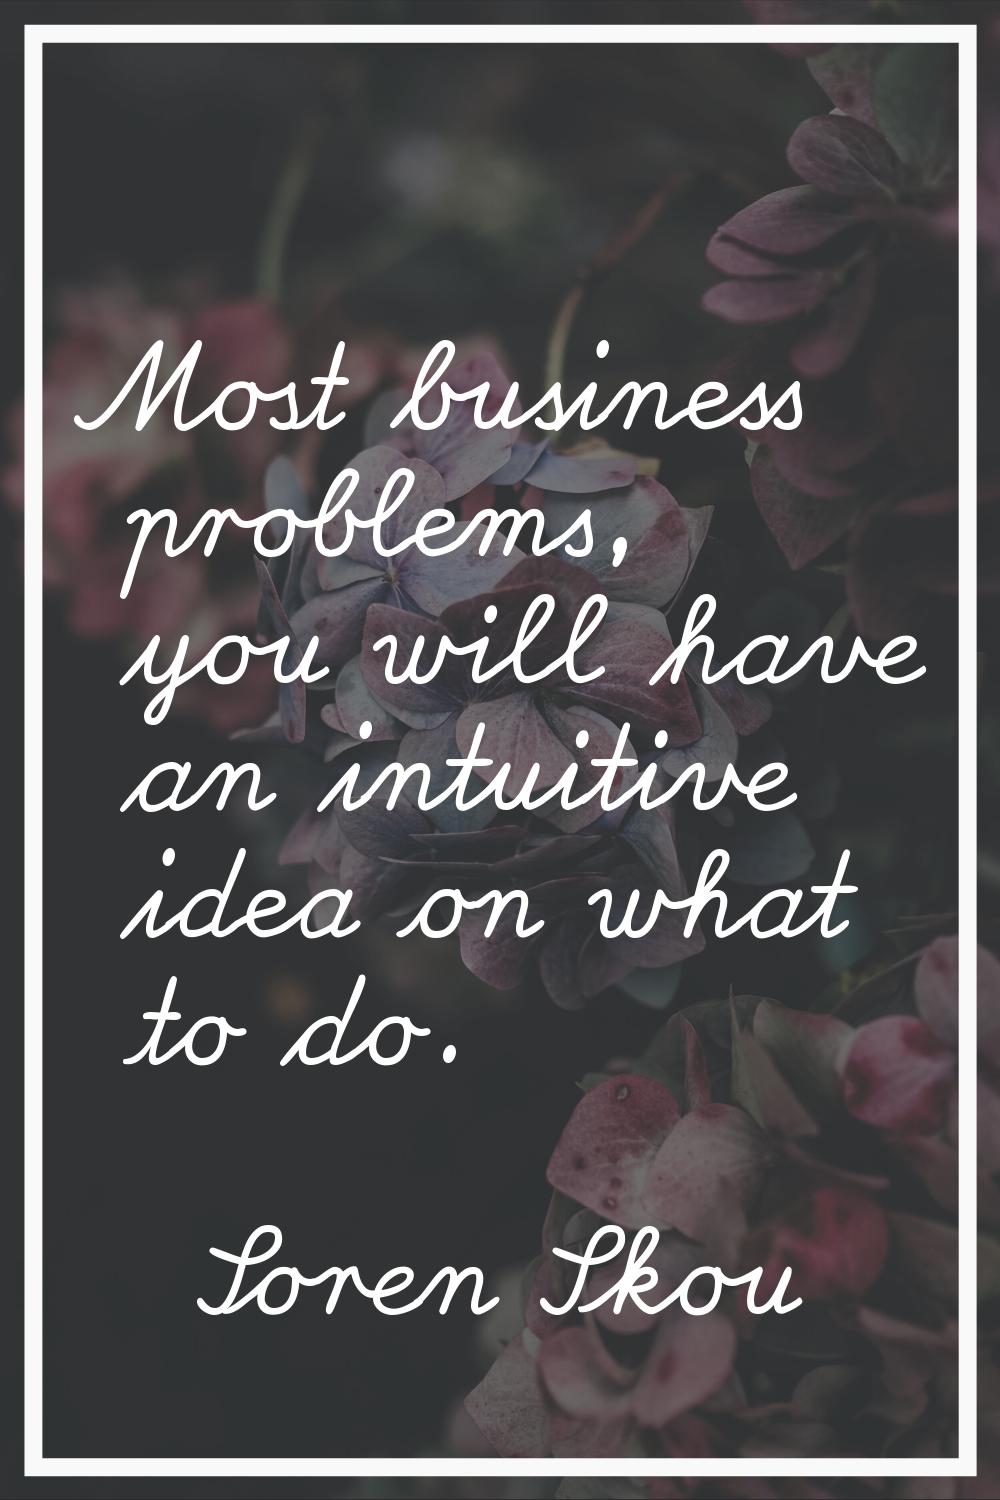 Most business problems, you will have an intuitive idea on what to do.